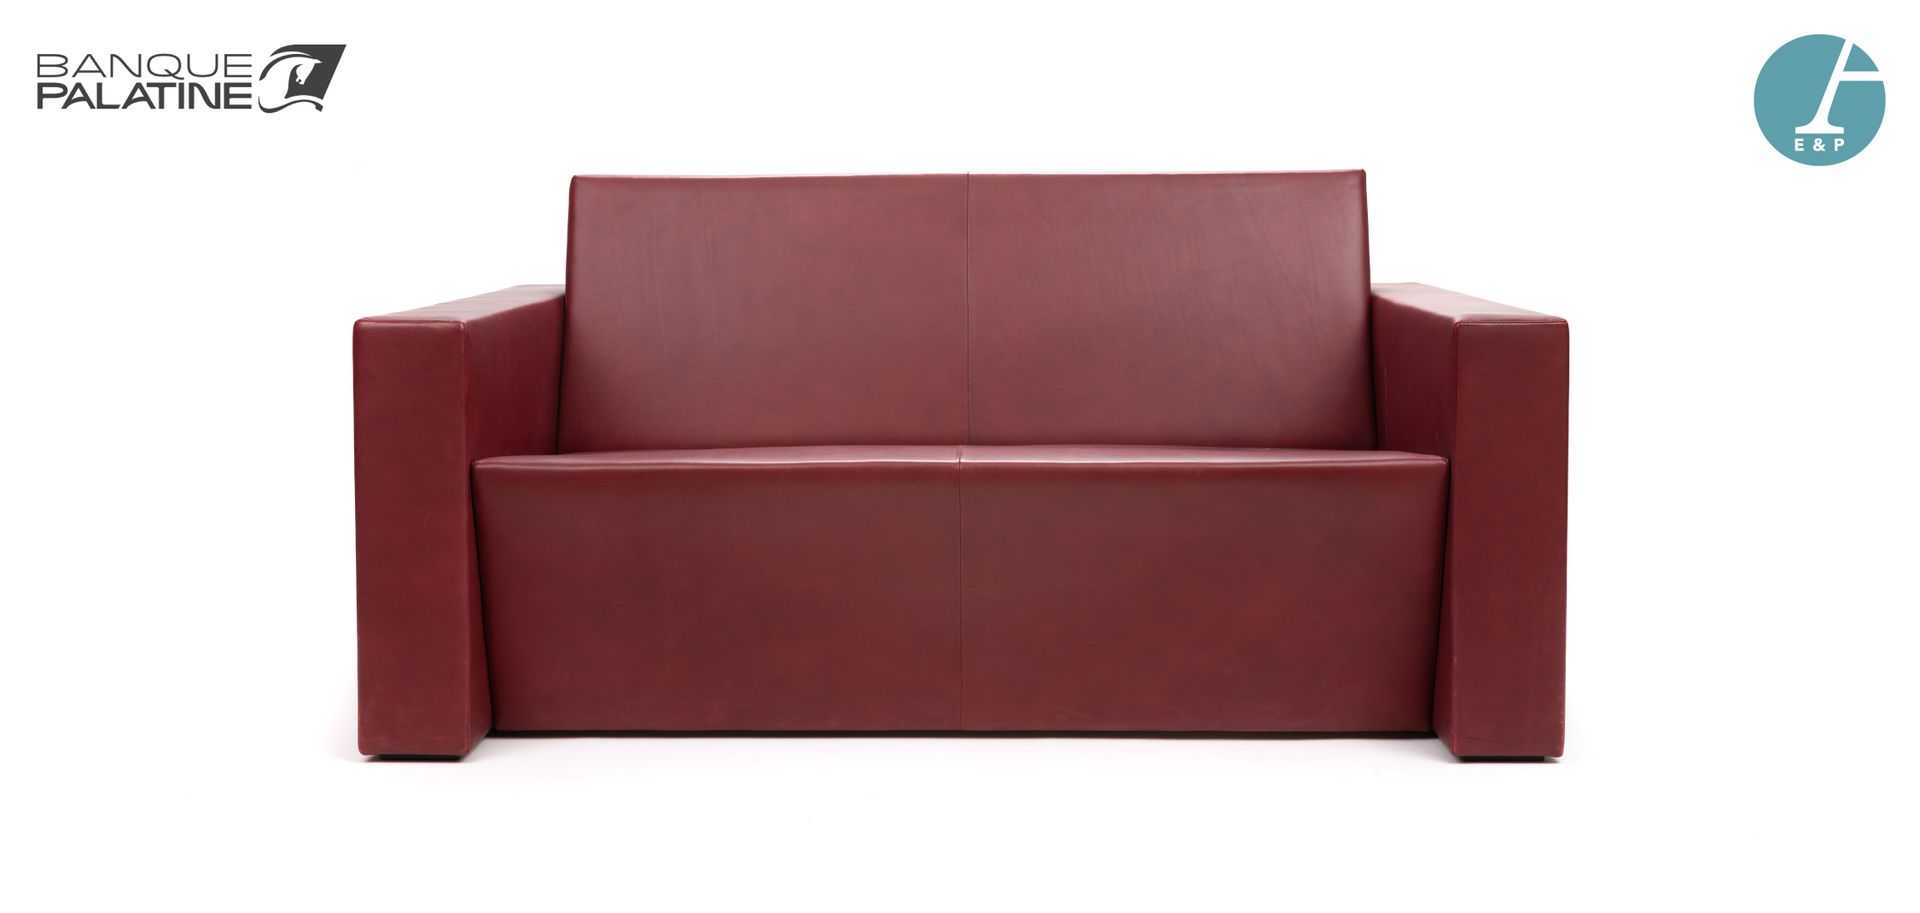 Null Matteo GRASSI, two-seater sofa in burgundy leather.

Scratches. Condition o&hellip;